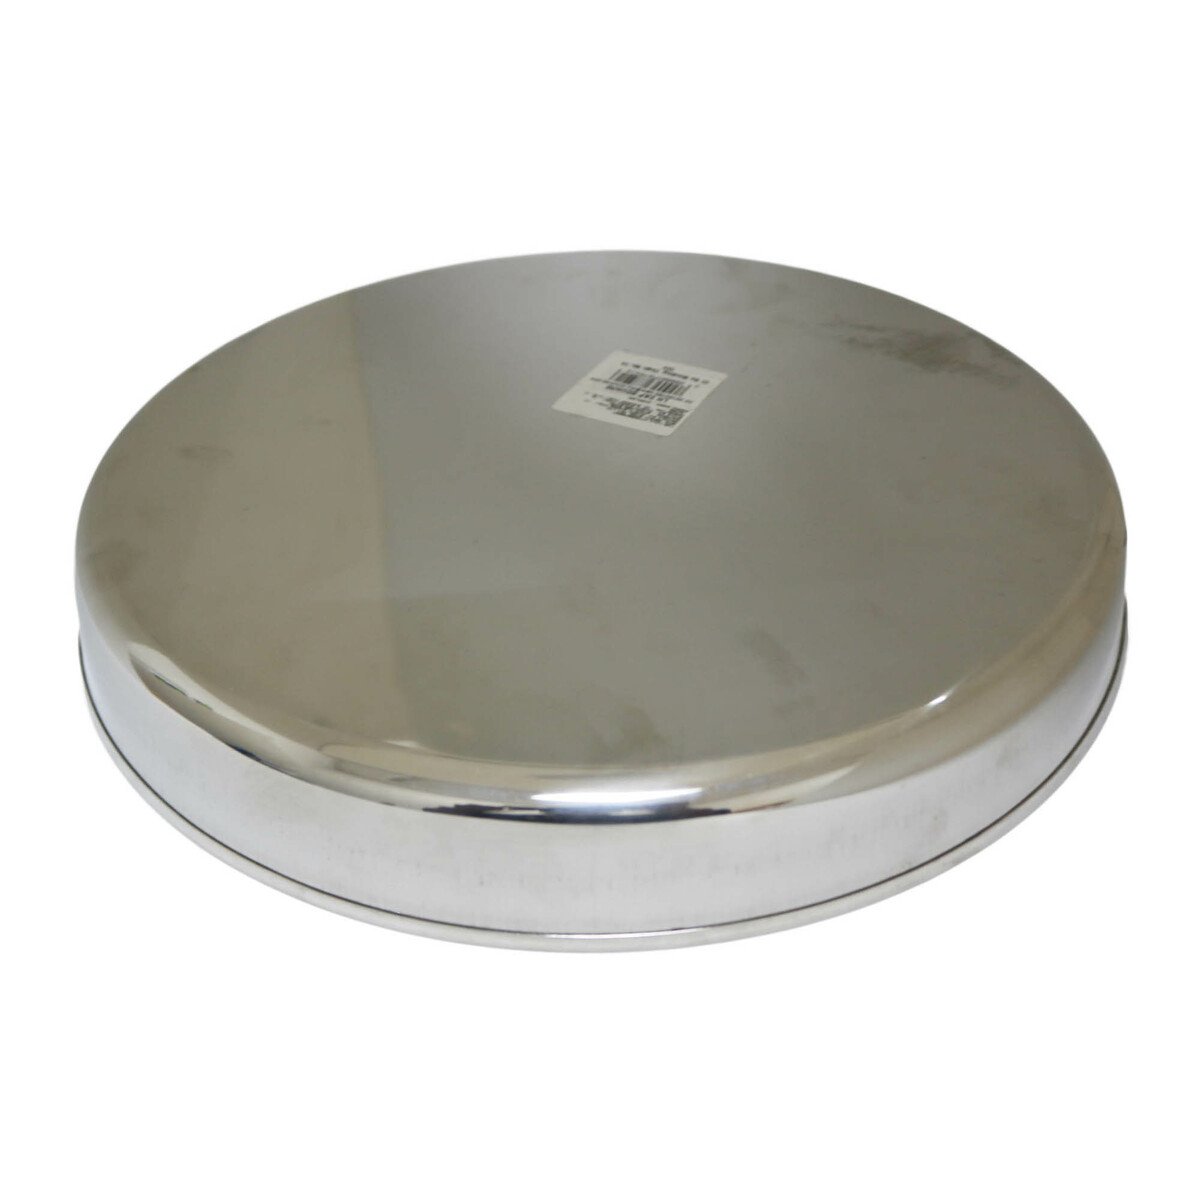 Chefline Stainless Steel Binding Thali No.14 Ind